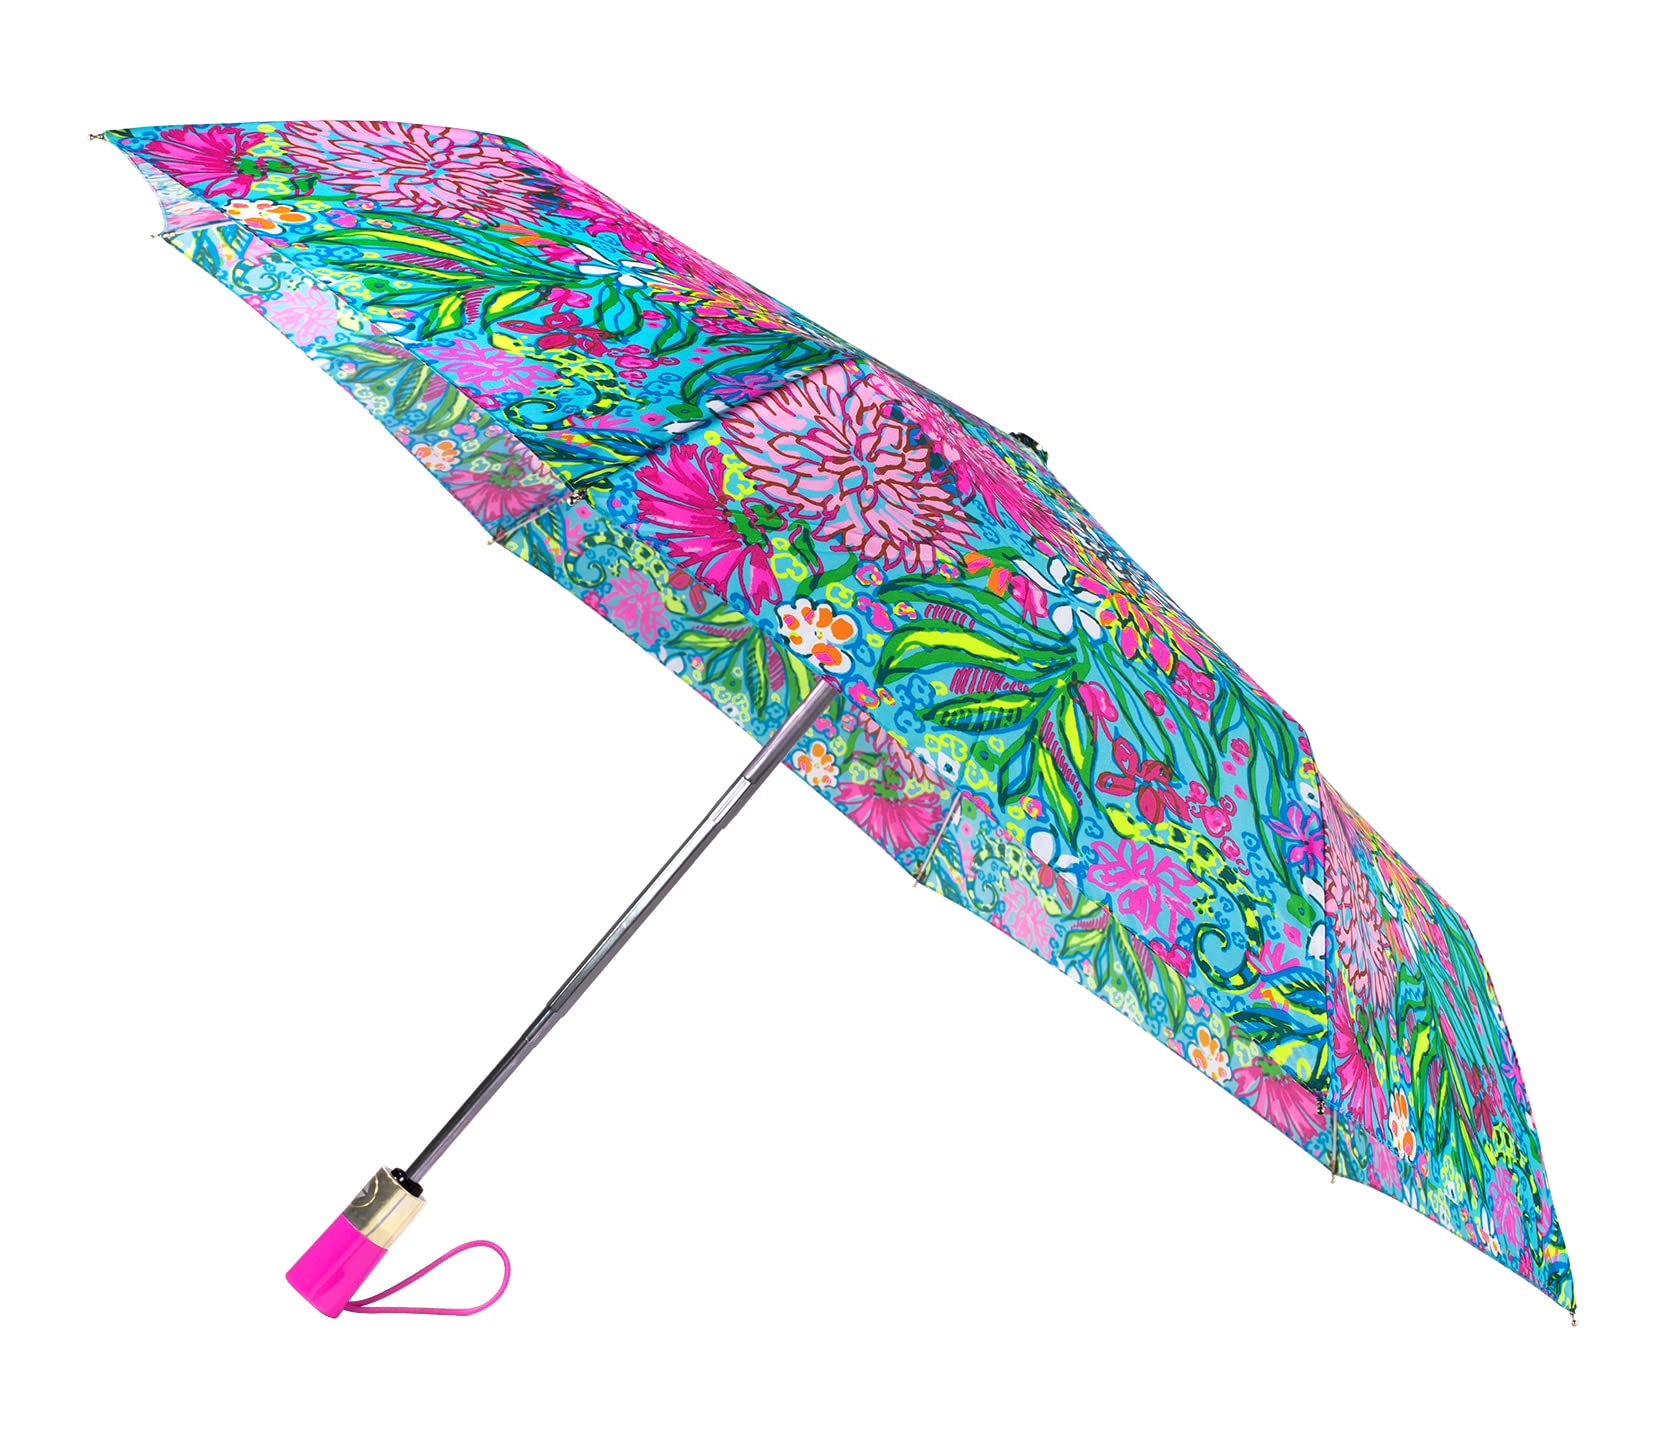 Lilly Pulitzer Travel Umbrella Compact, Cute Umbrella with Automatic Open and Storage Sleeve, Folding Umbrella for Rain or Sun Protection (Walking on Sunshine), One Size